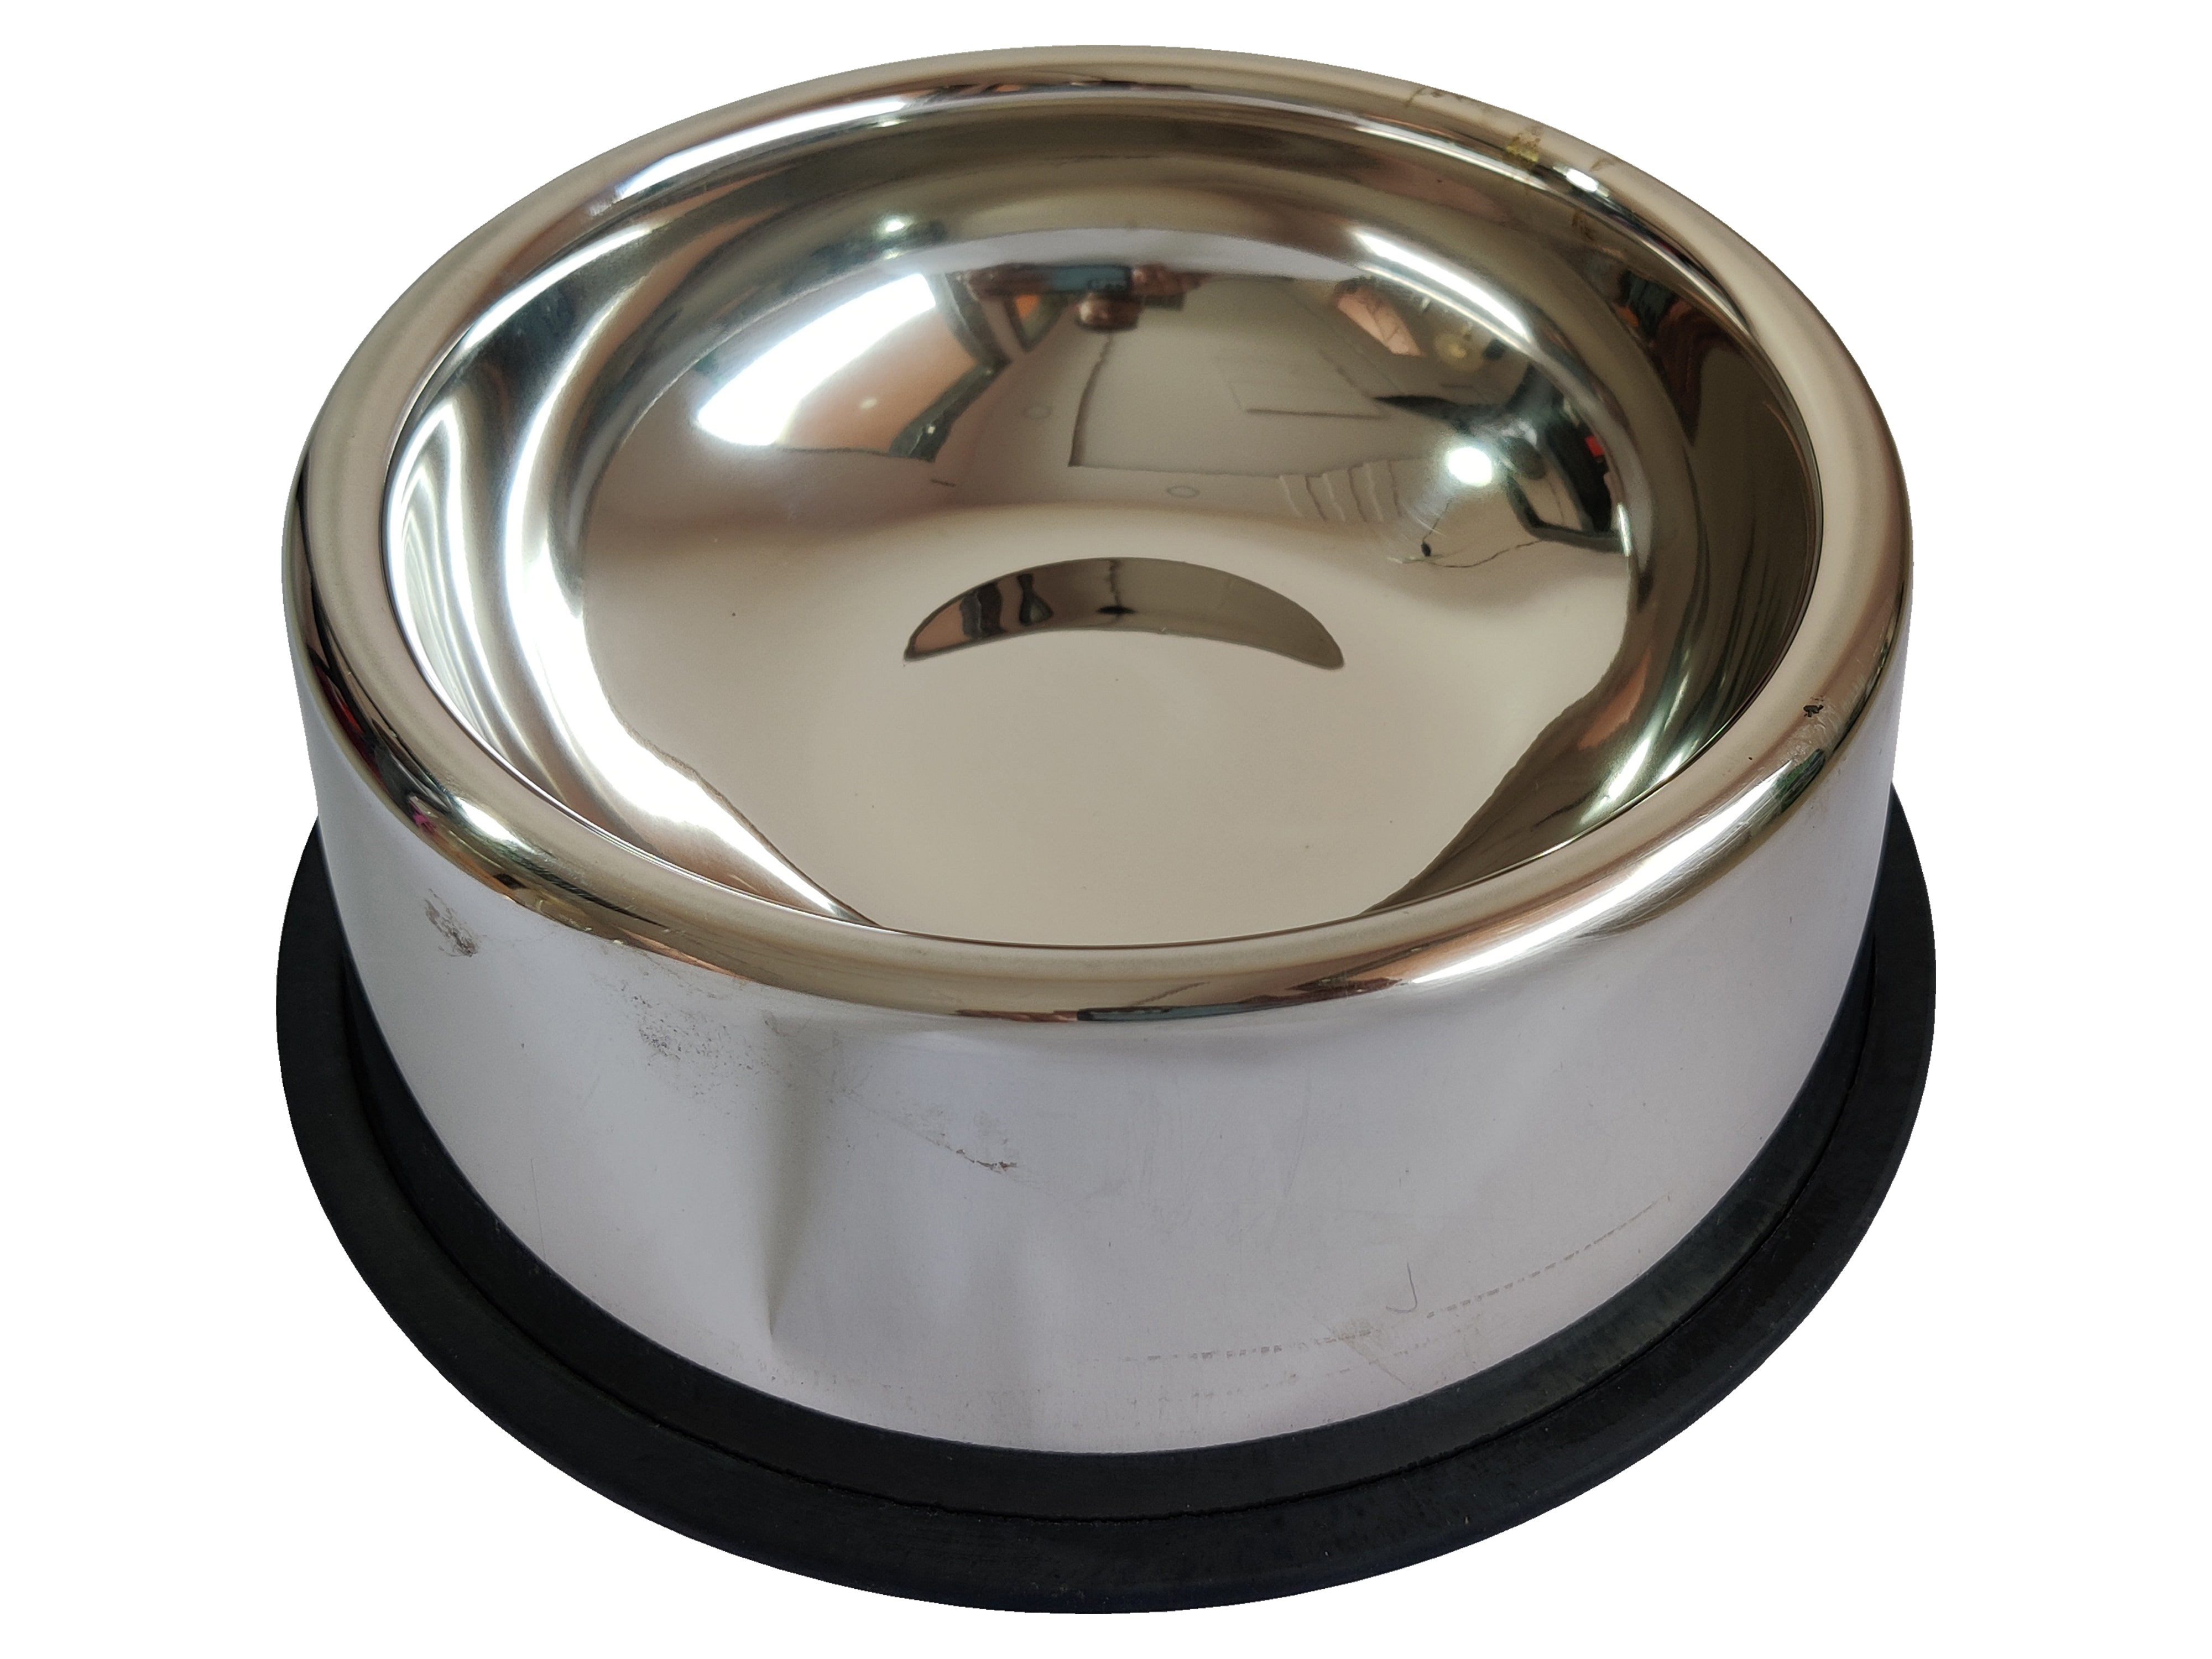 Stainless steel pet food bowl for feeding your dogs and puppy (1000ml)